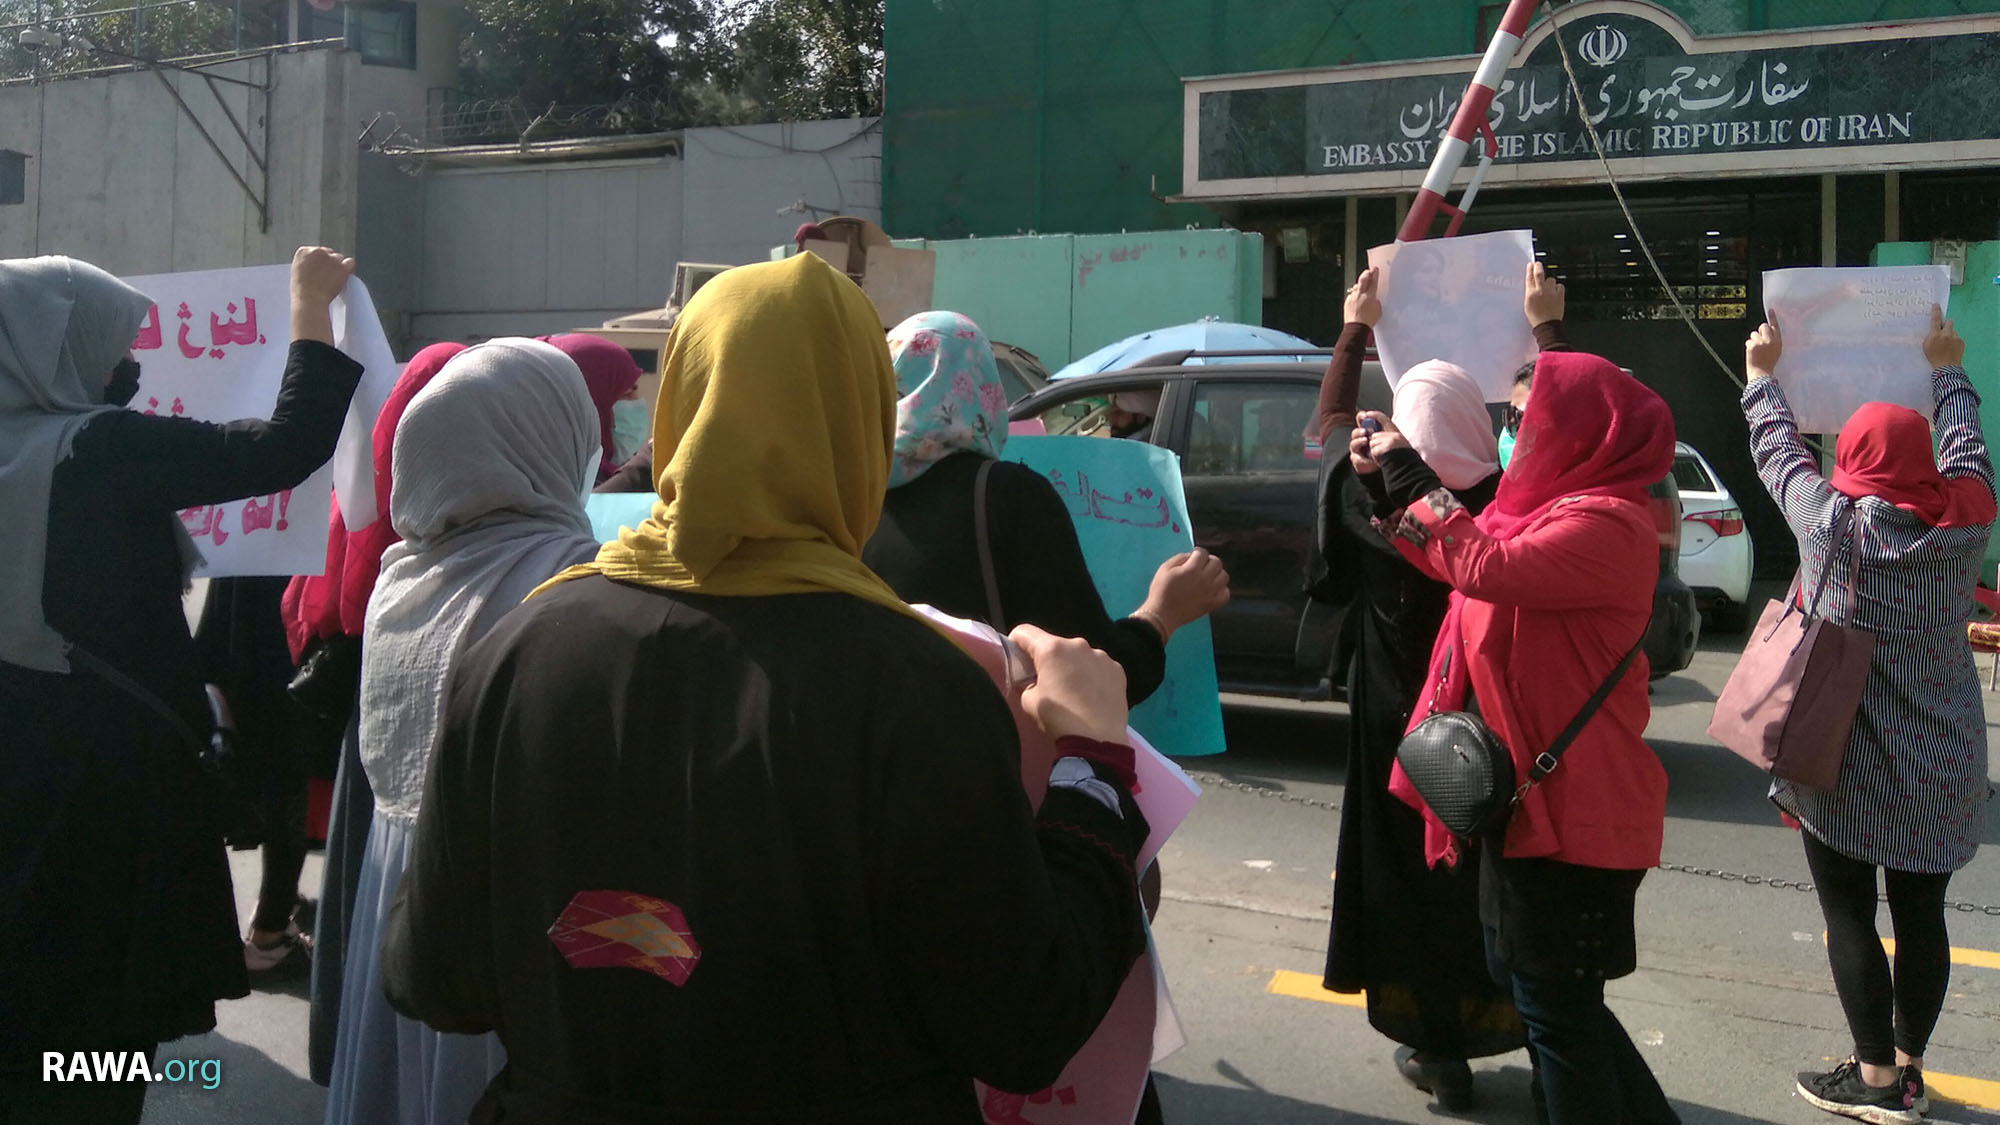 Afghan women protest in Kabul against Iranian regime to show solidarity with Mahsa and Iran women uprising